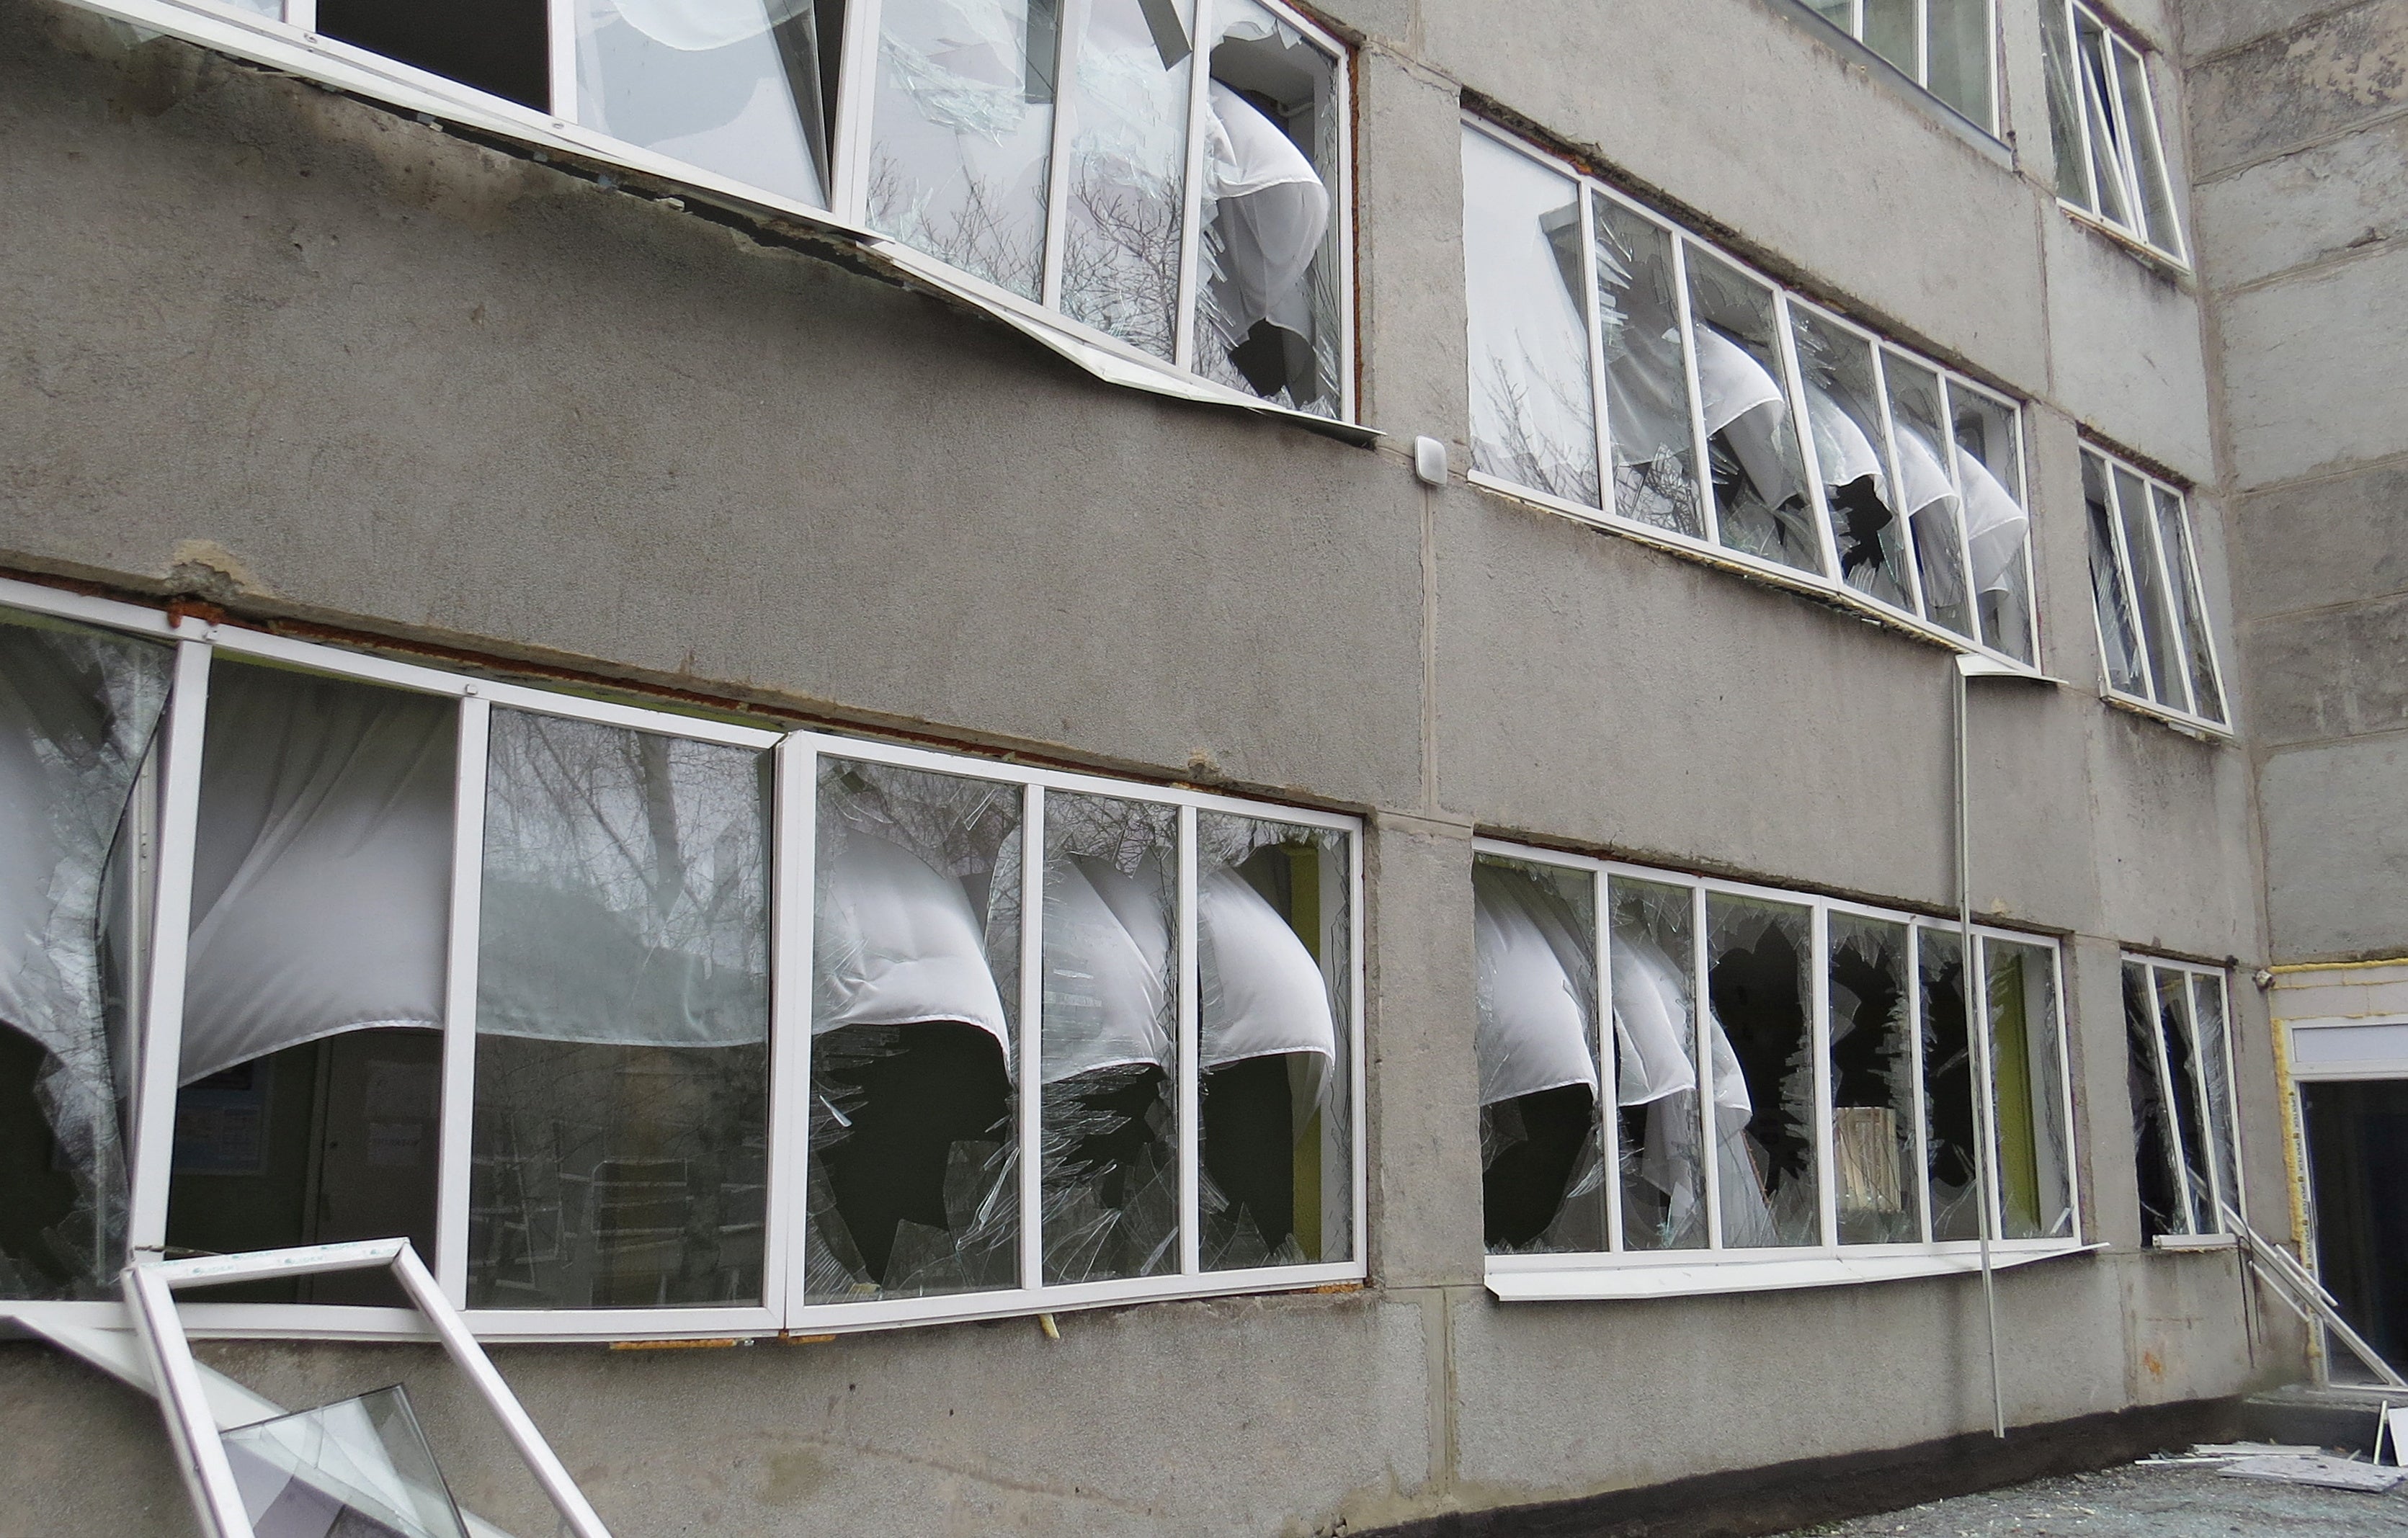 A view shows a school building which locals claim was damaged by recent shelling in Mariupol